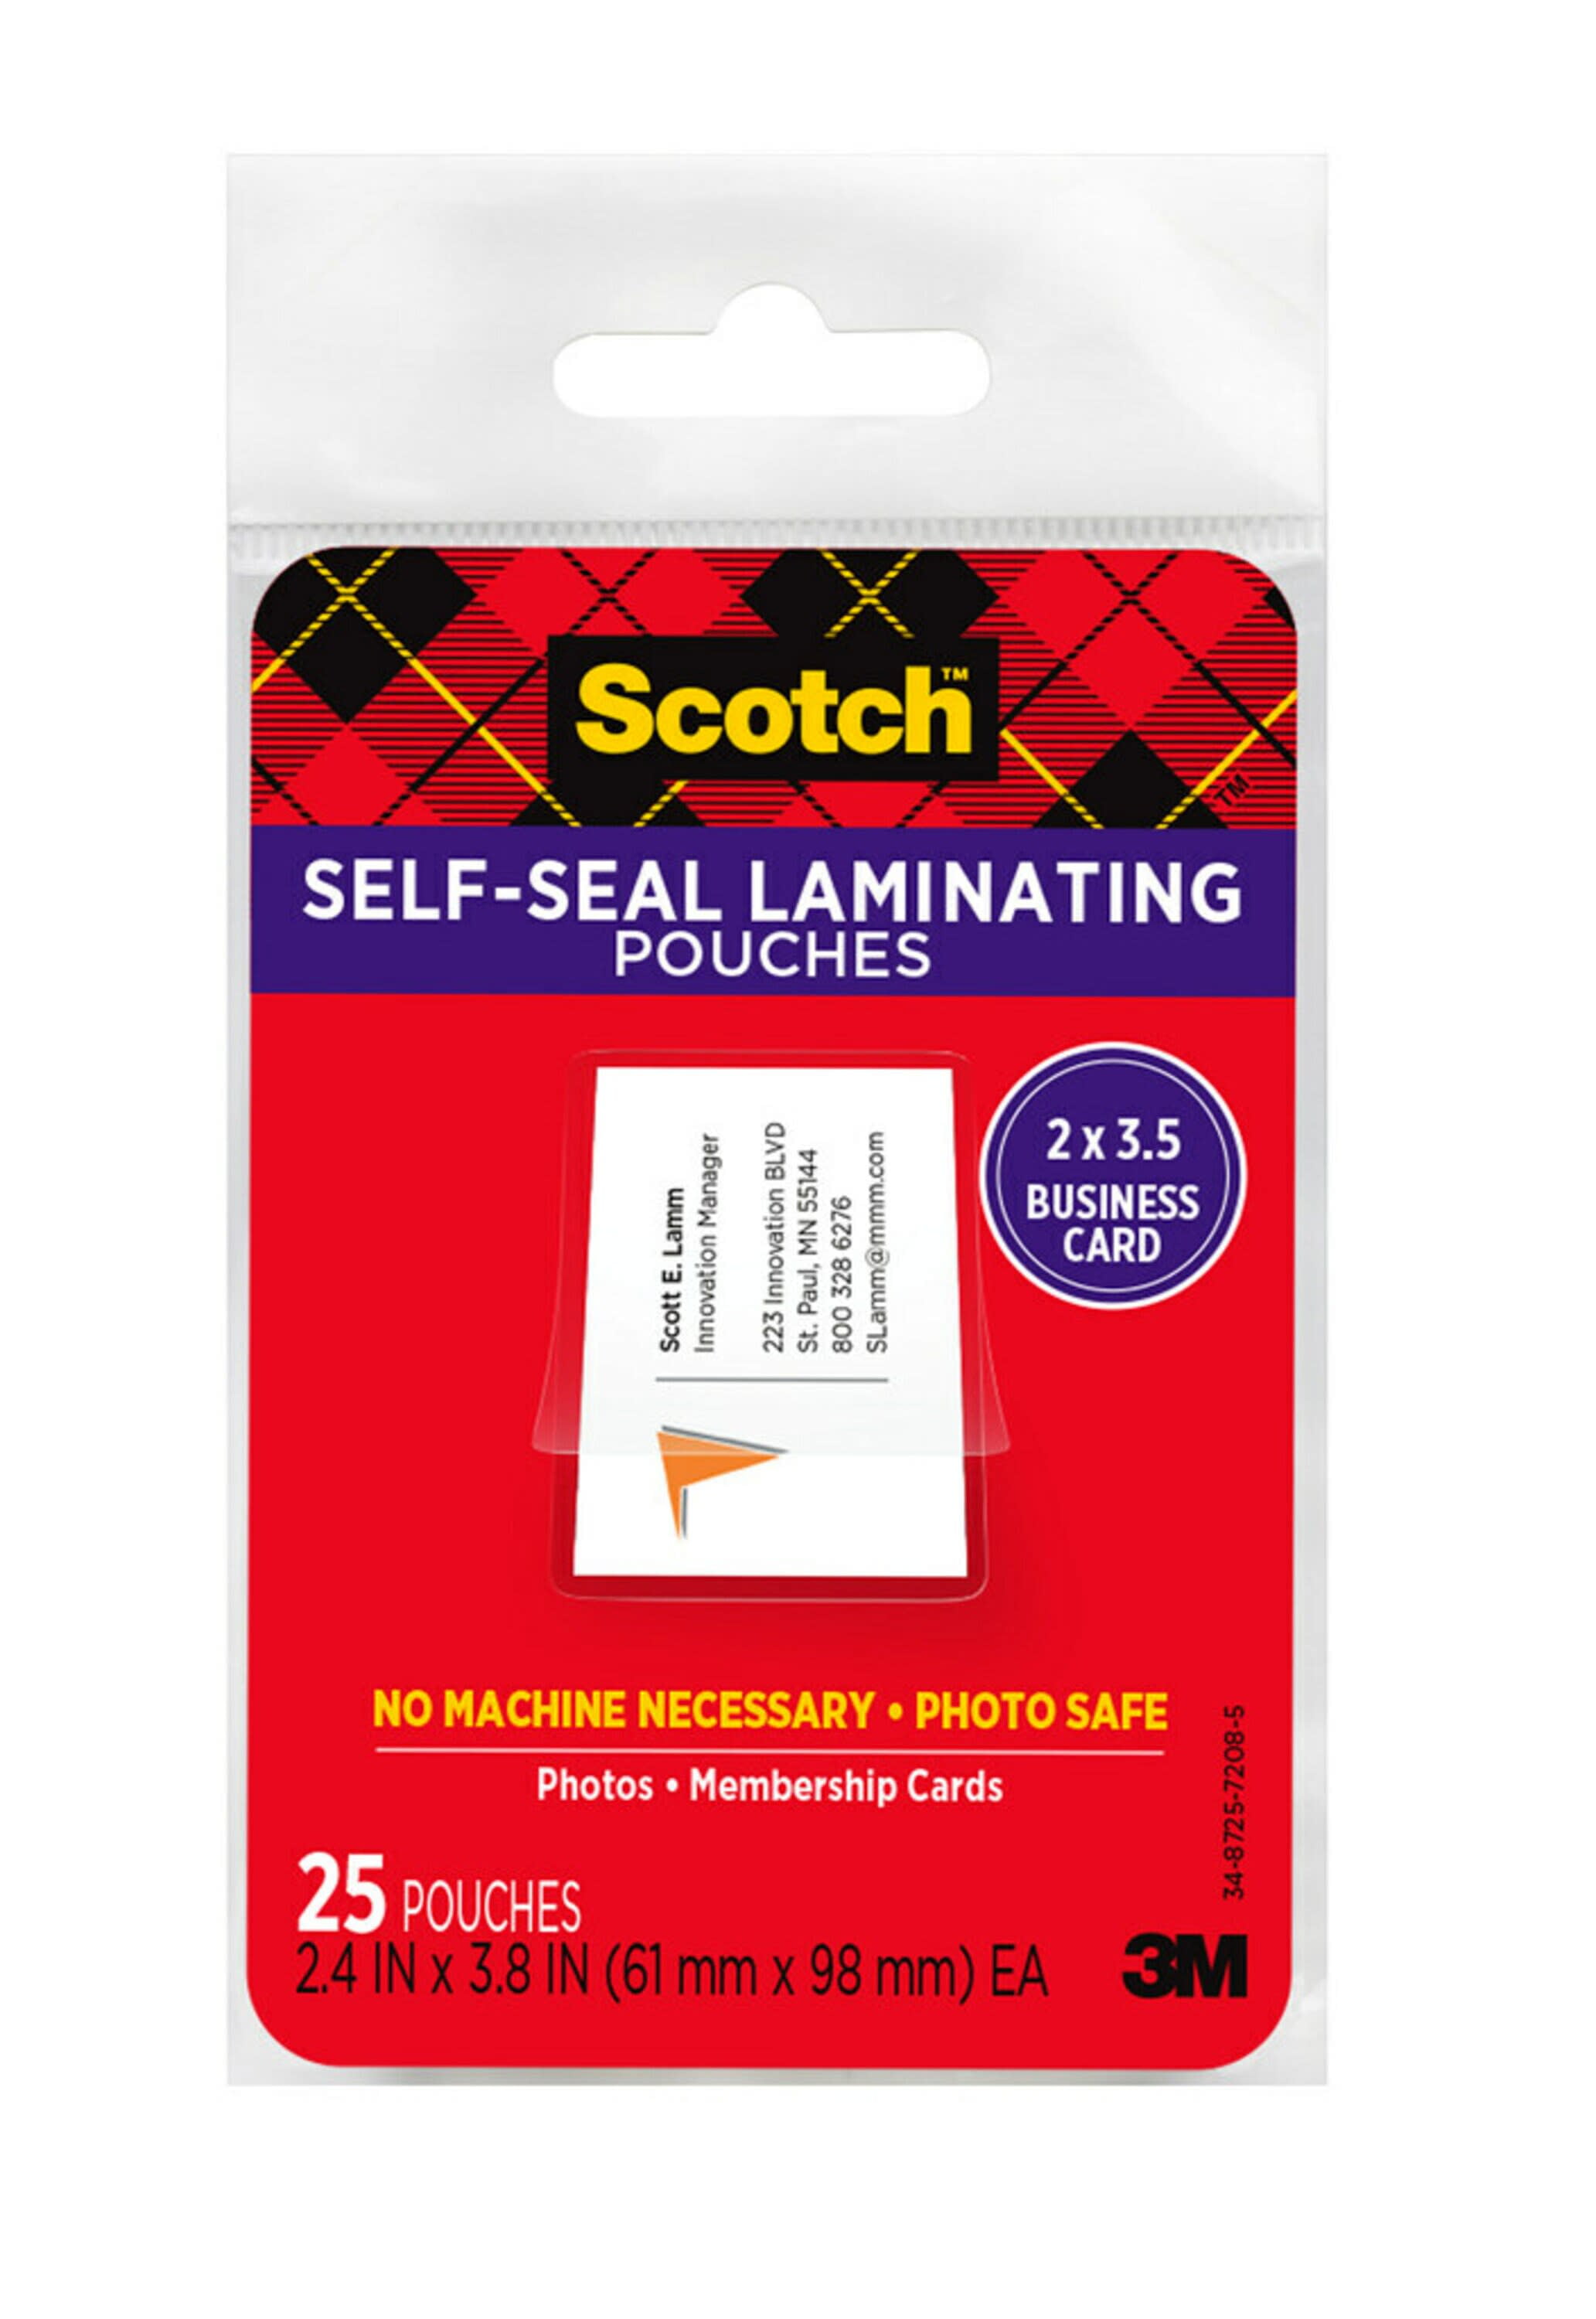 Scotch Self-Sealing Laminating Pouches, 25 Count, 2